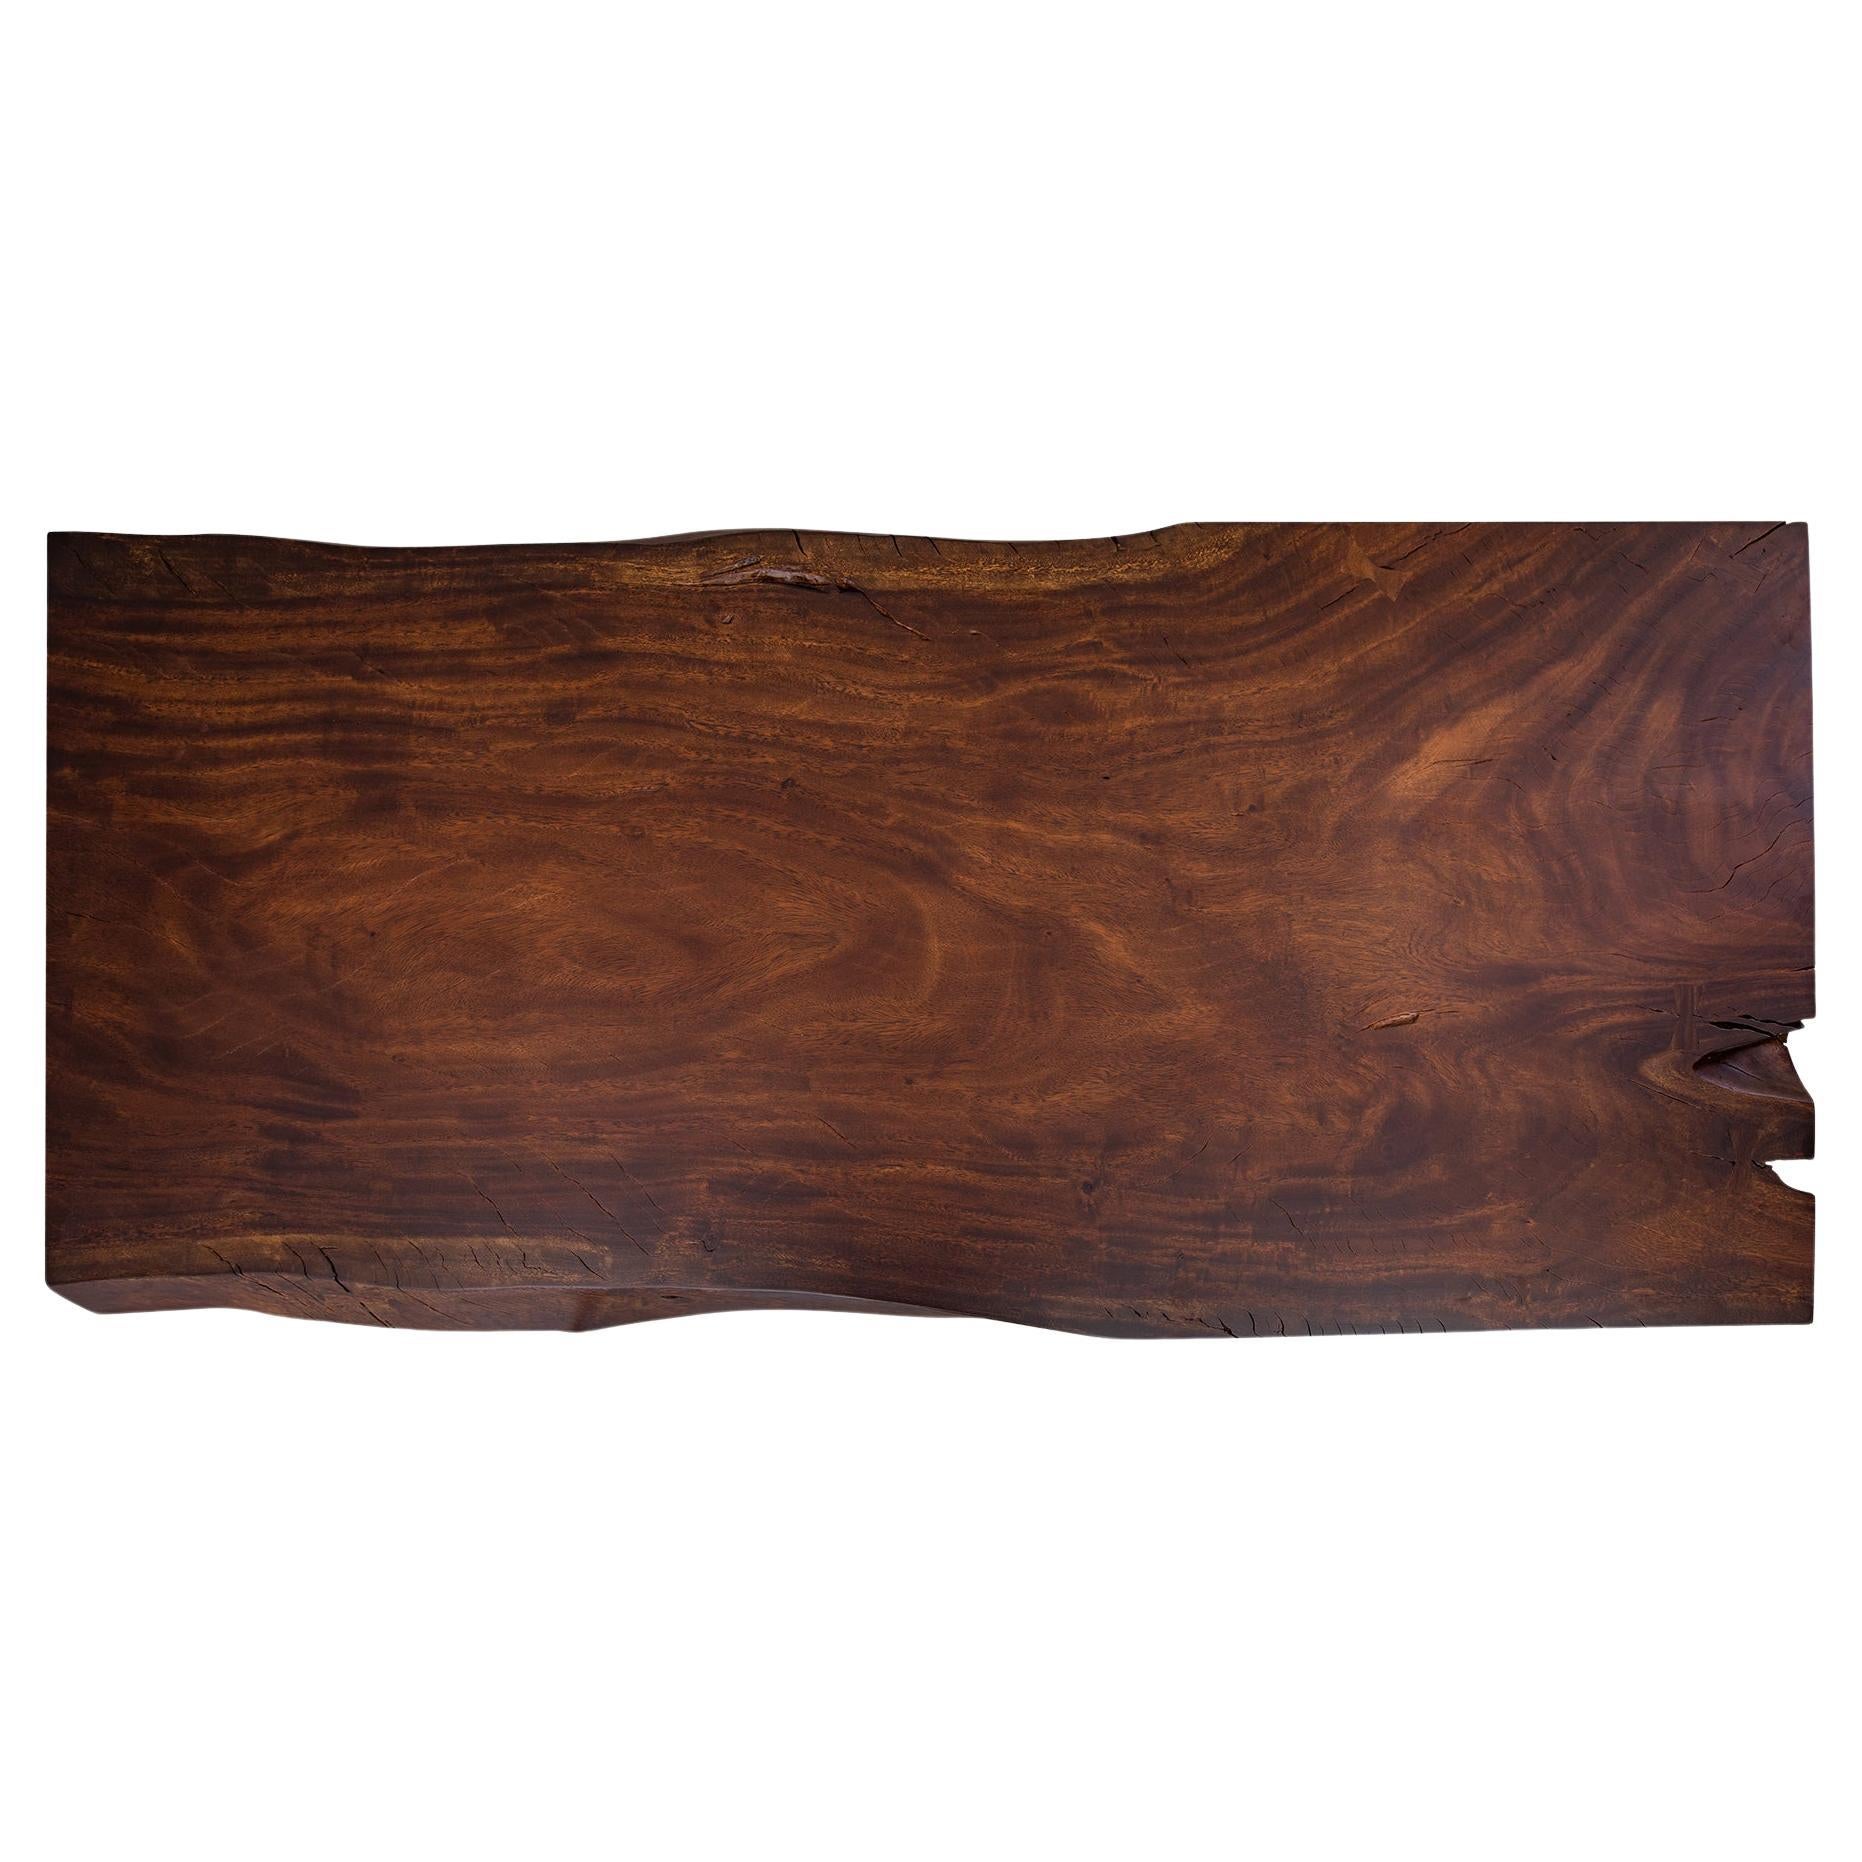 Acacia Live Edge Limited Edition Slab Table in Smooth Dark Chocolate